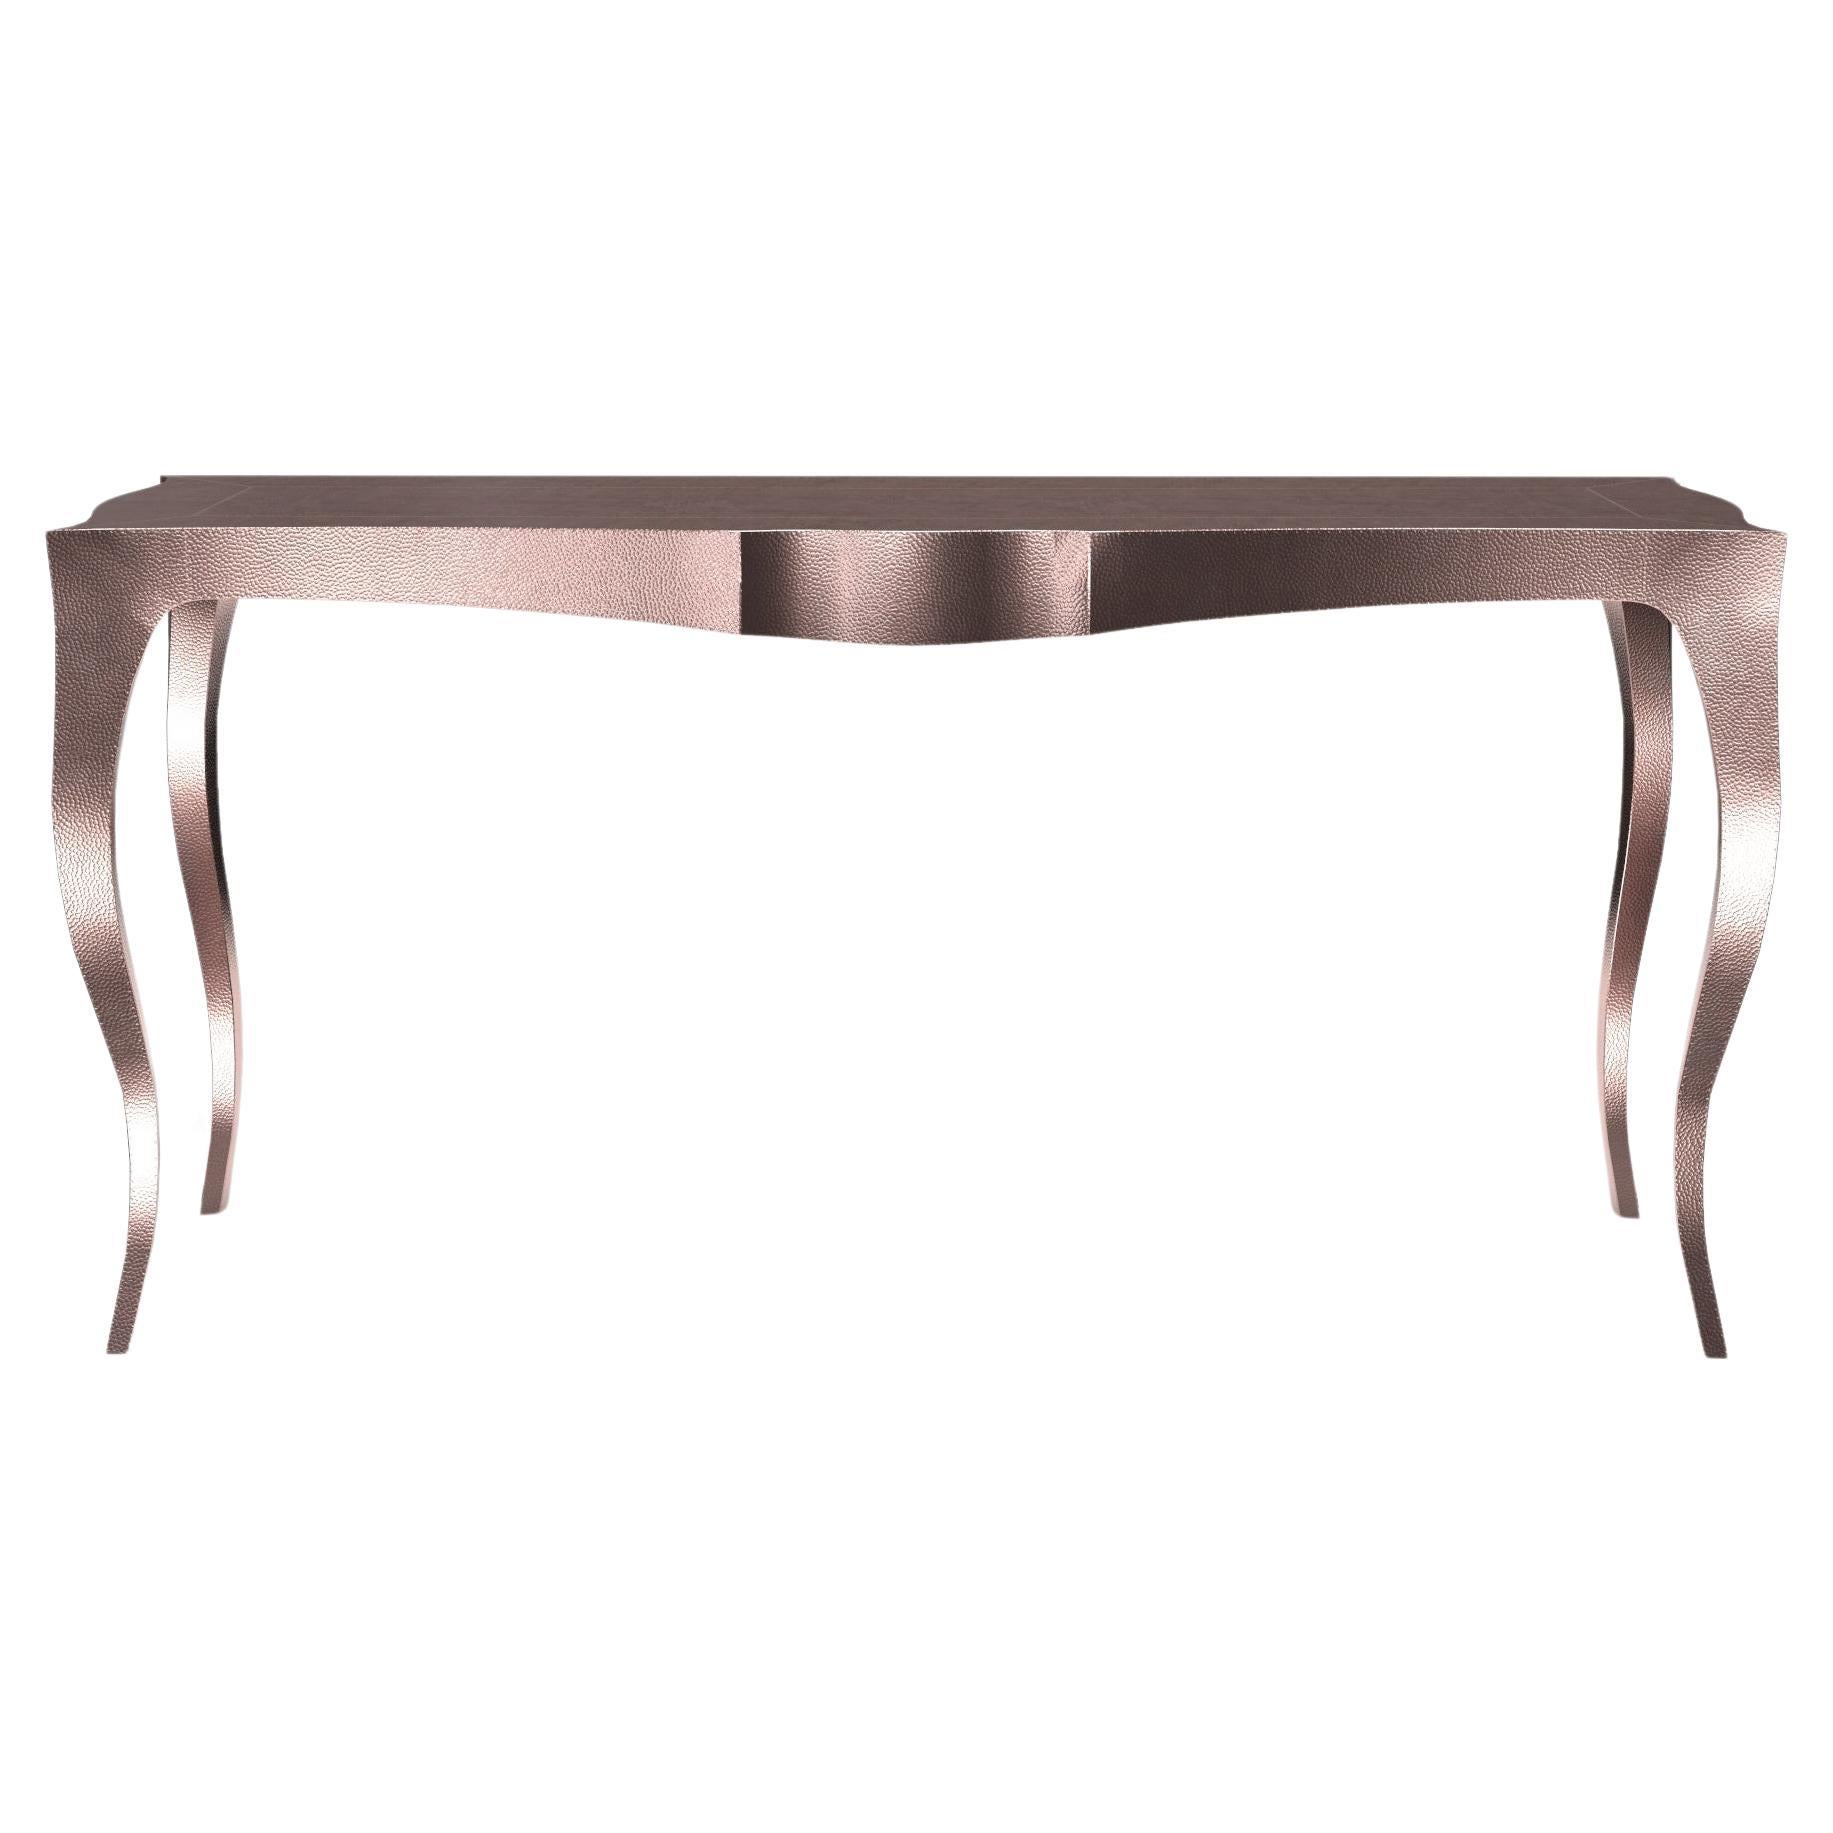 Louise Console Art Deco Card and Tea Tables Mid. Hammered Copper by Paul Mathieu